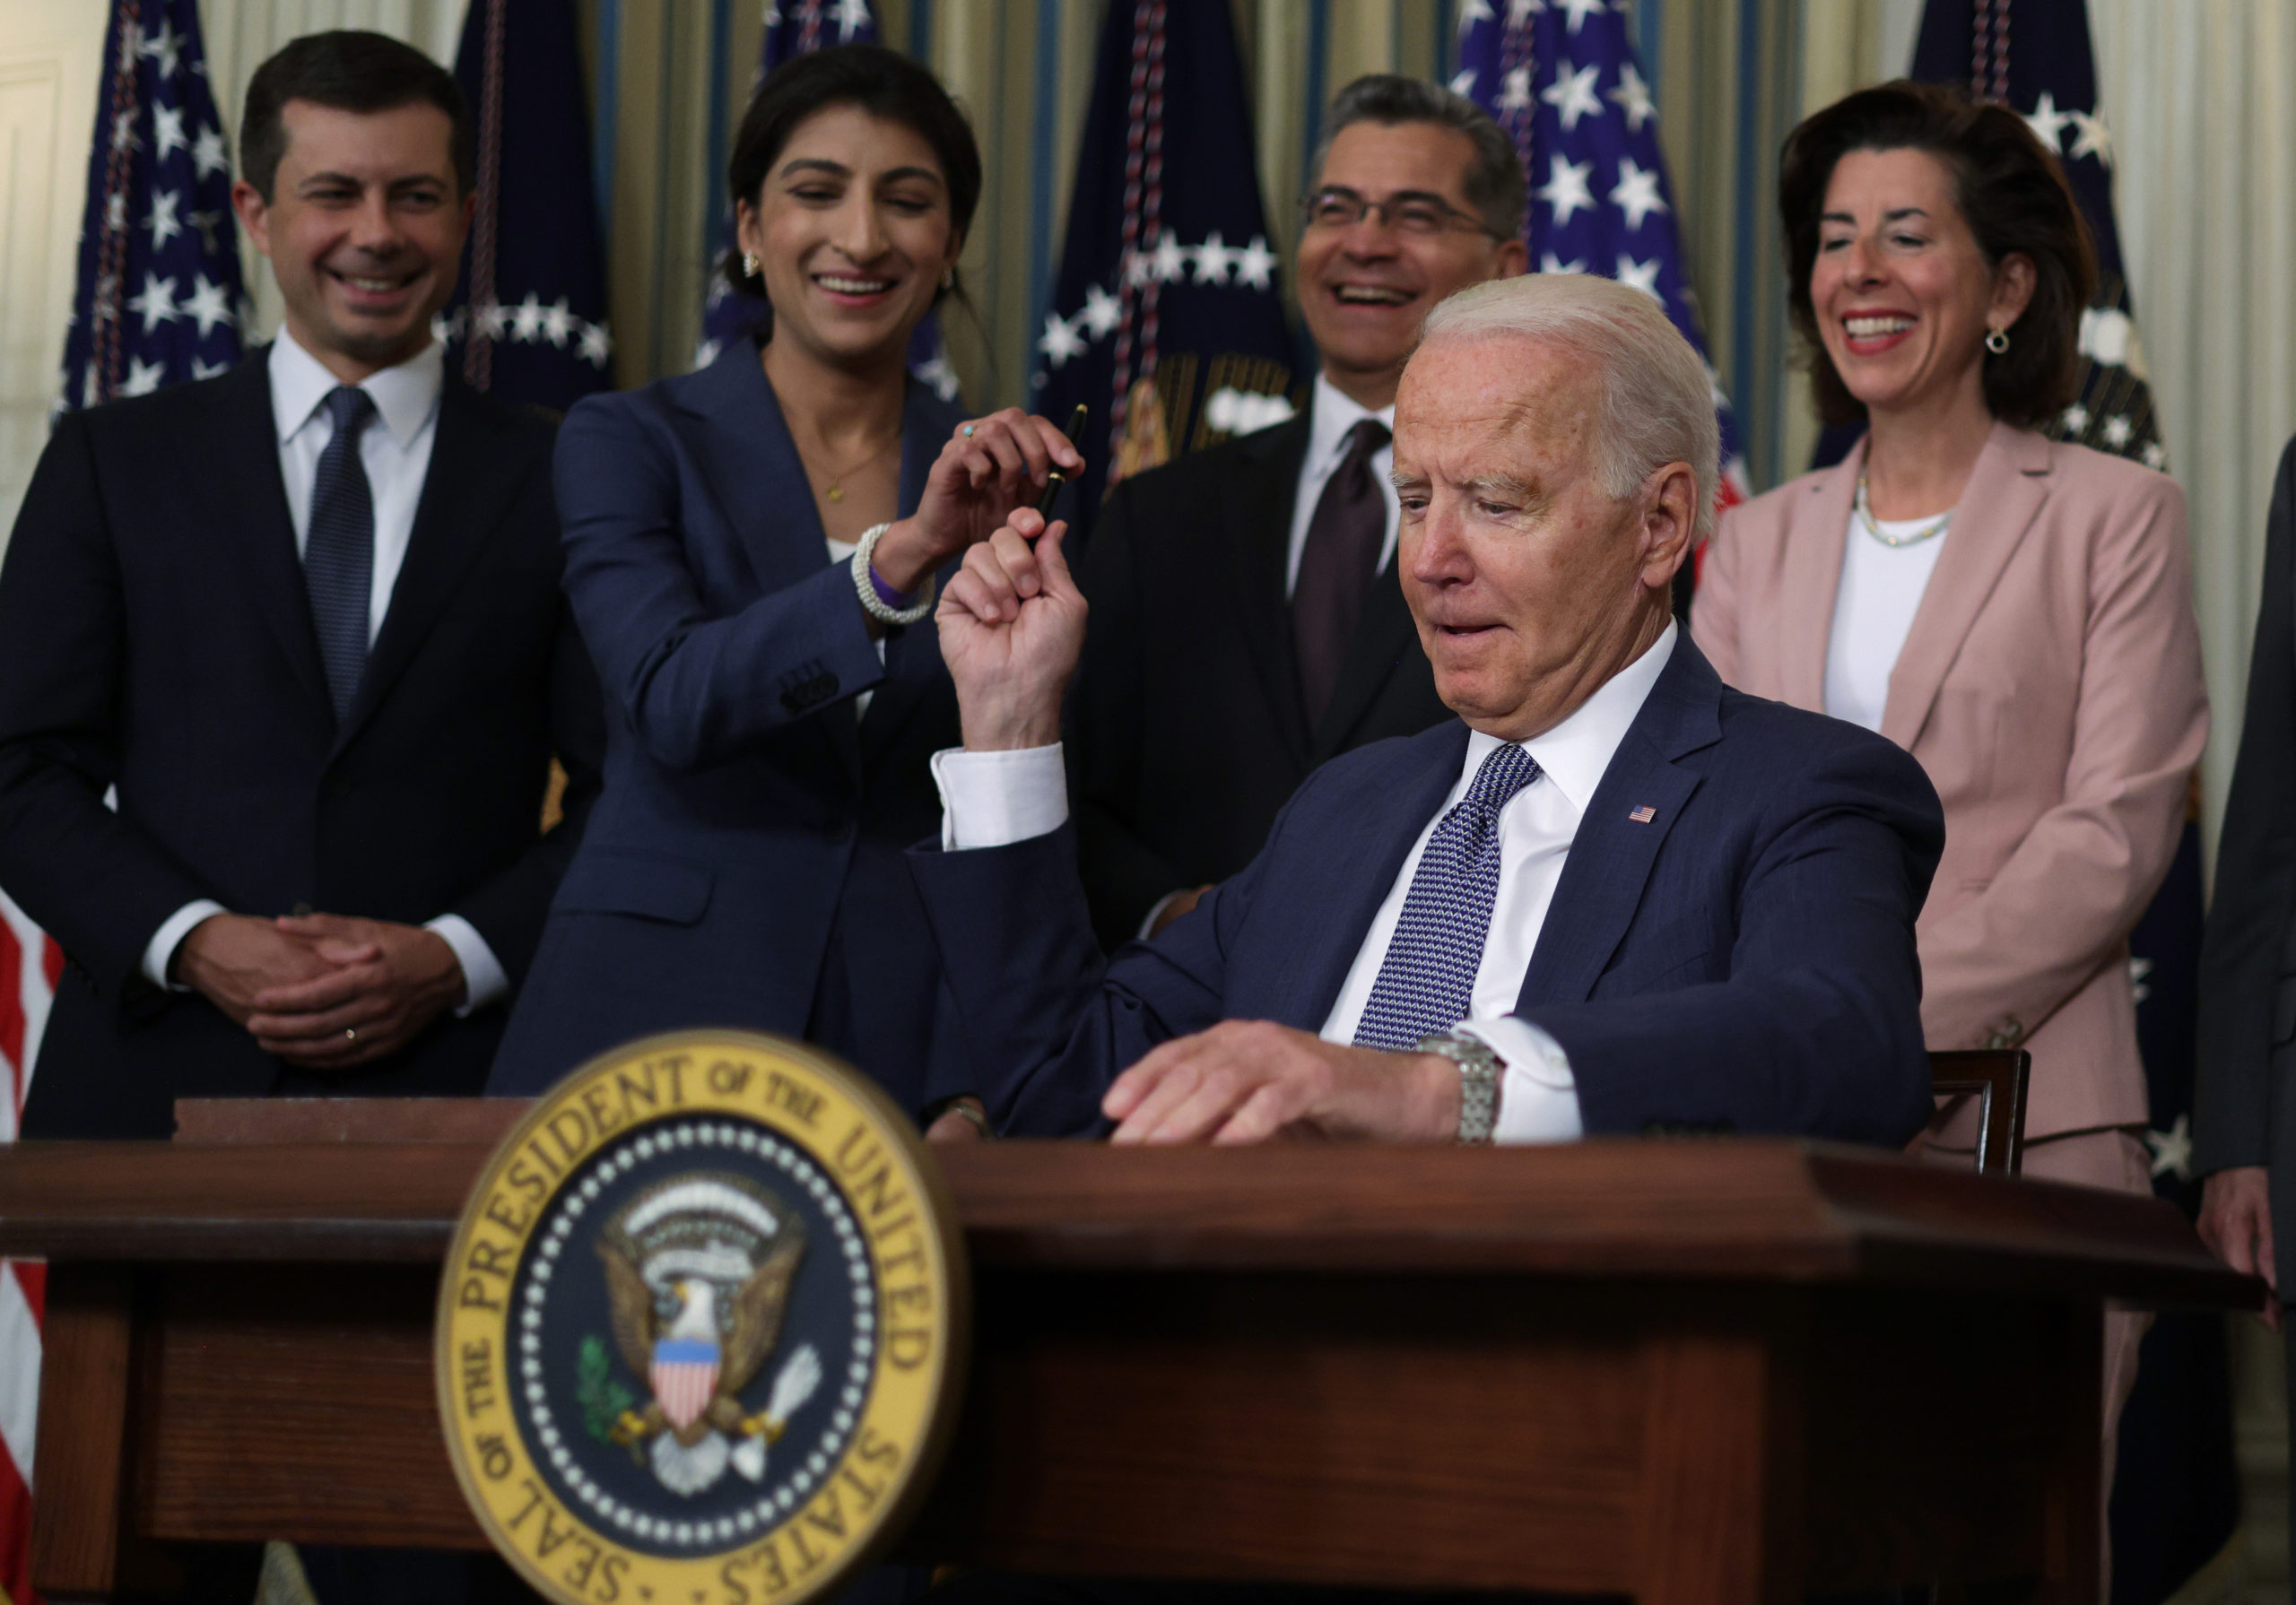 President Joe Biden passes a pen to FTC Chair Lina Khan at the White House on July 9. (Alex Wong/Getty Images)